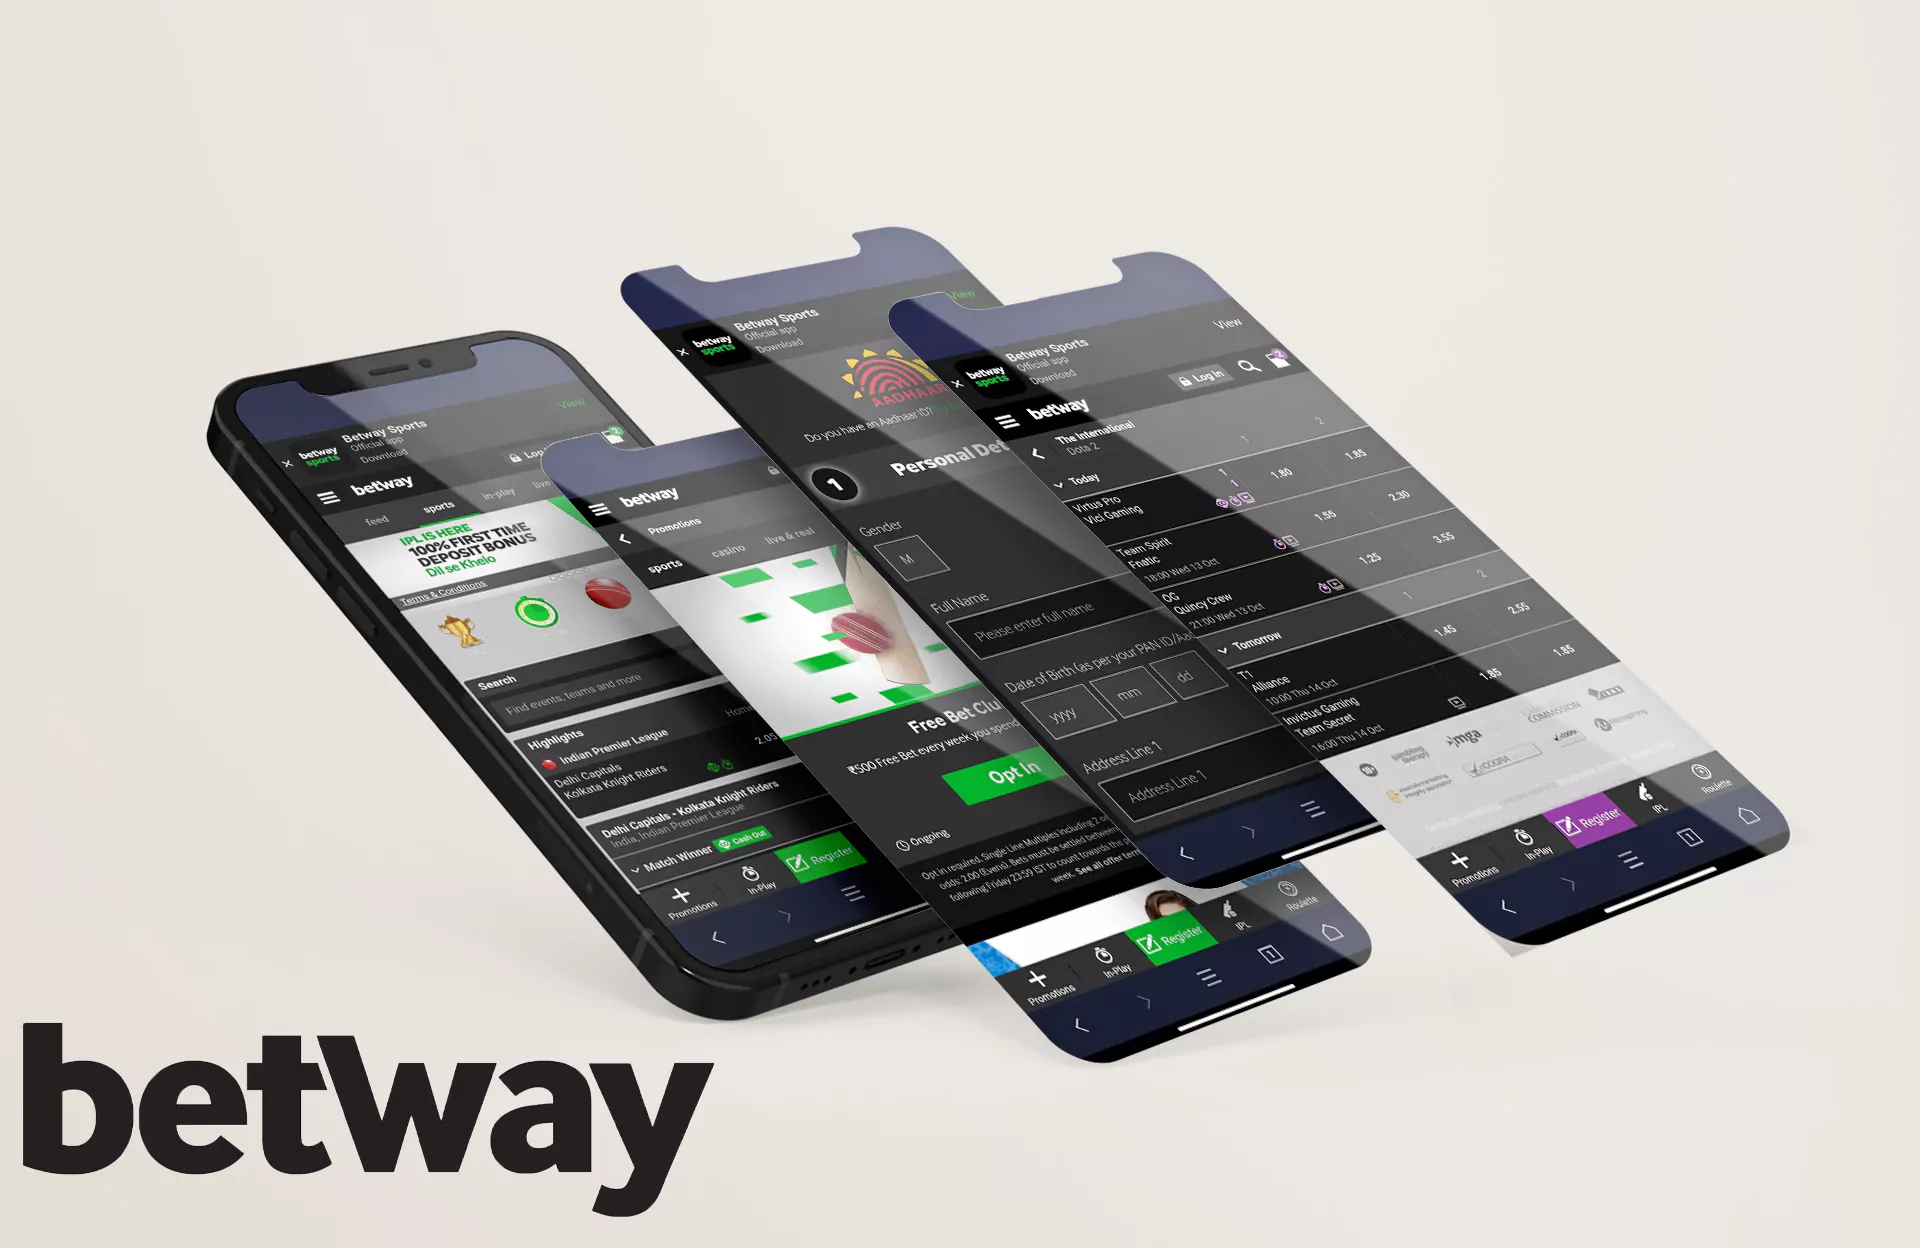 To sum it up, we see that betway is one of the most worthy applications, it has a mobile casino, a bonus system and other features for mobile users.